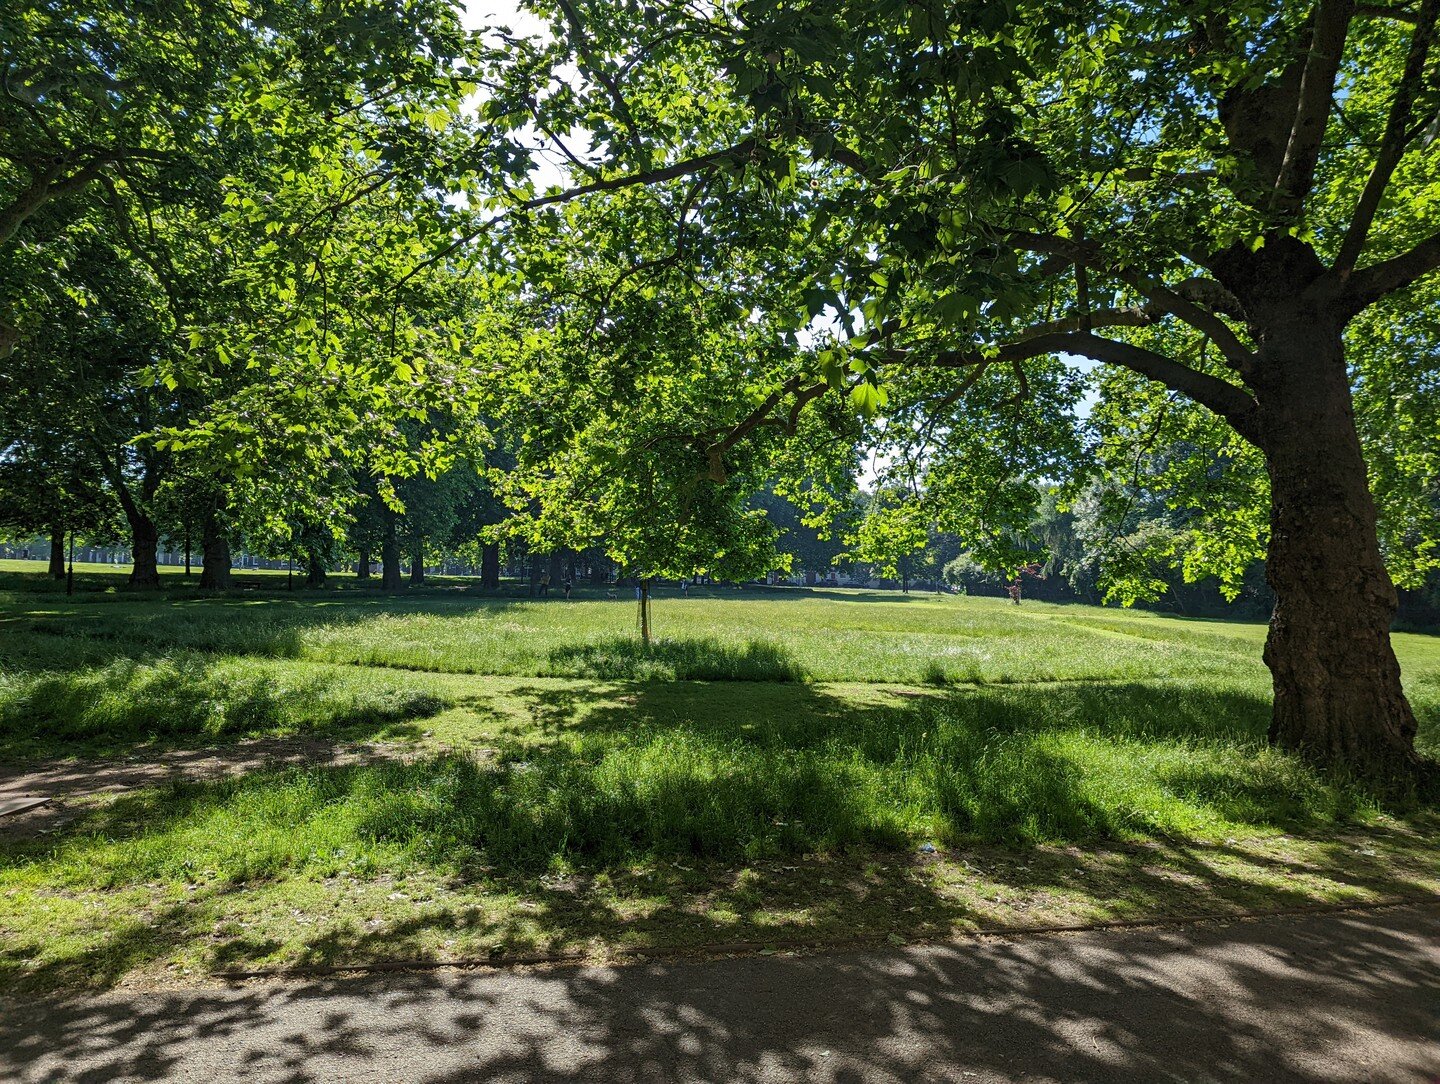 Green spaces in London, as in all cities, play a very important role in improving air quality and biodiversity, cooling the city and reducing the urban heat island (UHI) effect which causes global warming. 🔥

London has 3000 parks of varying sizes t